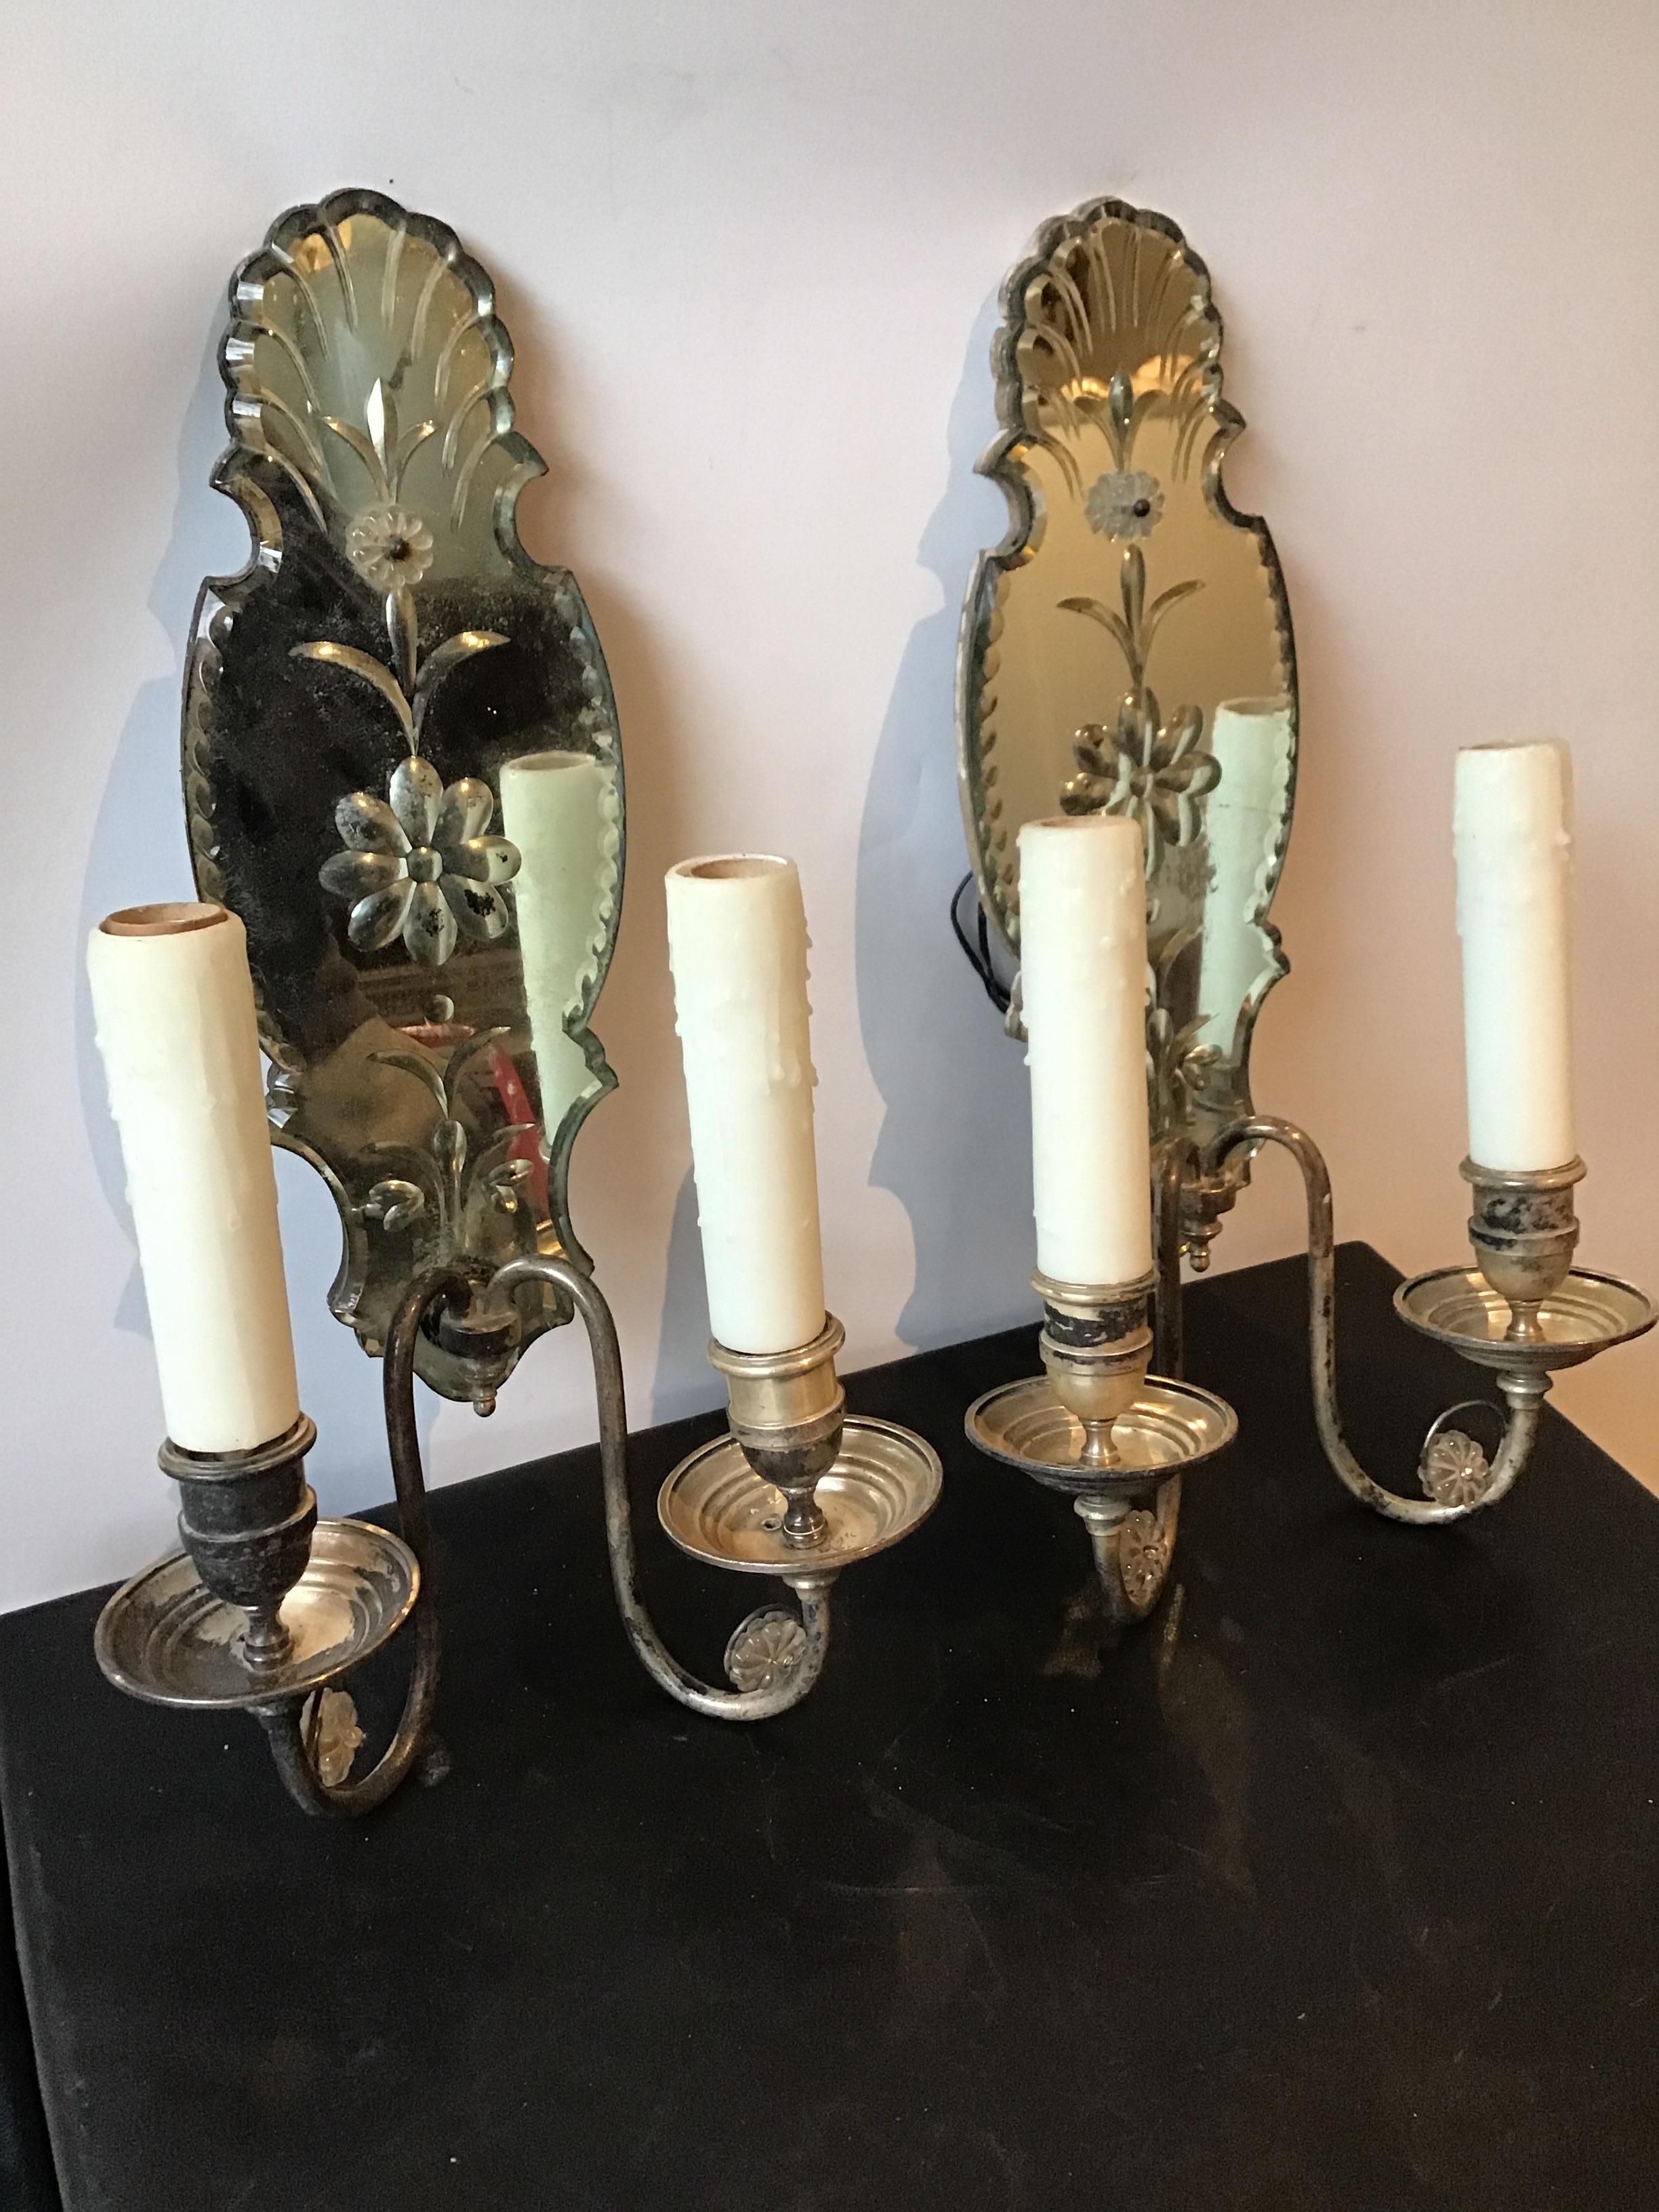 1920s Large Mirrored Sconces In Good Condition For Sale In Tarrytown, NY